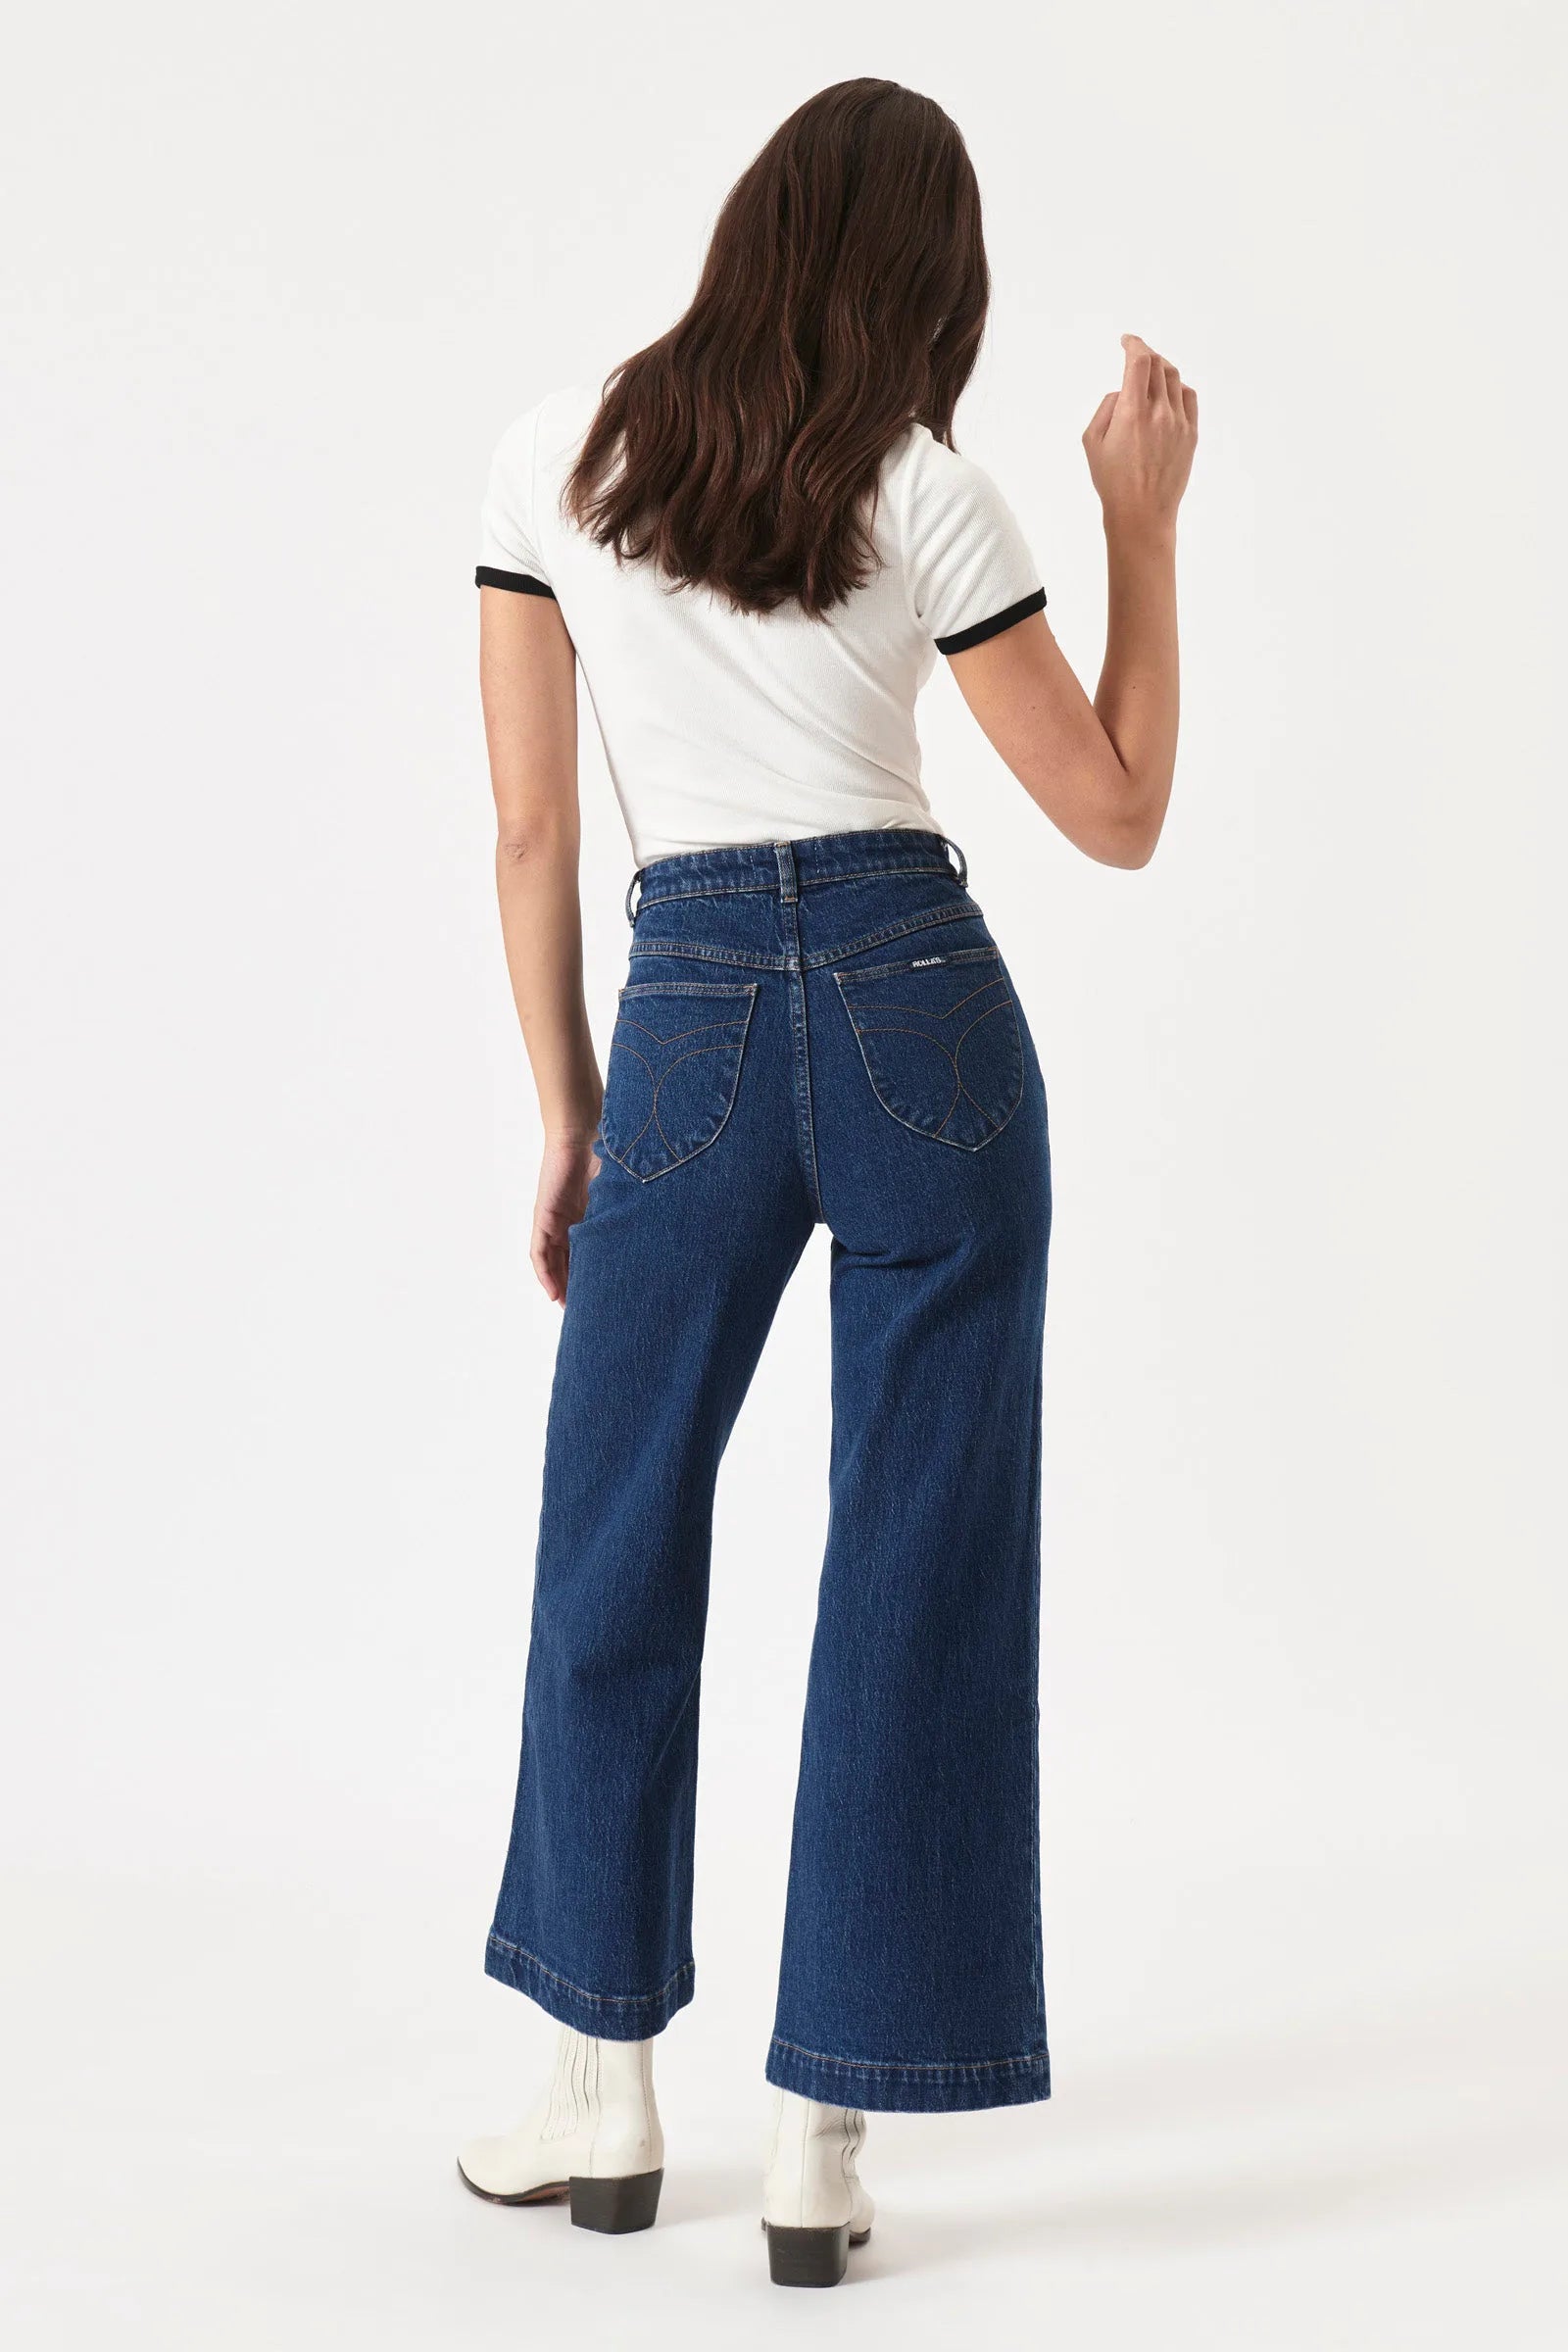 The Sailor Organic Dark Blue Jeans by Rolla&#39;s